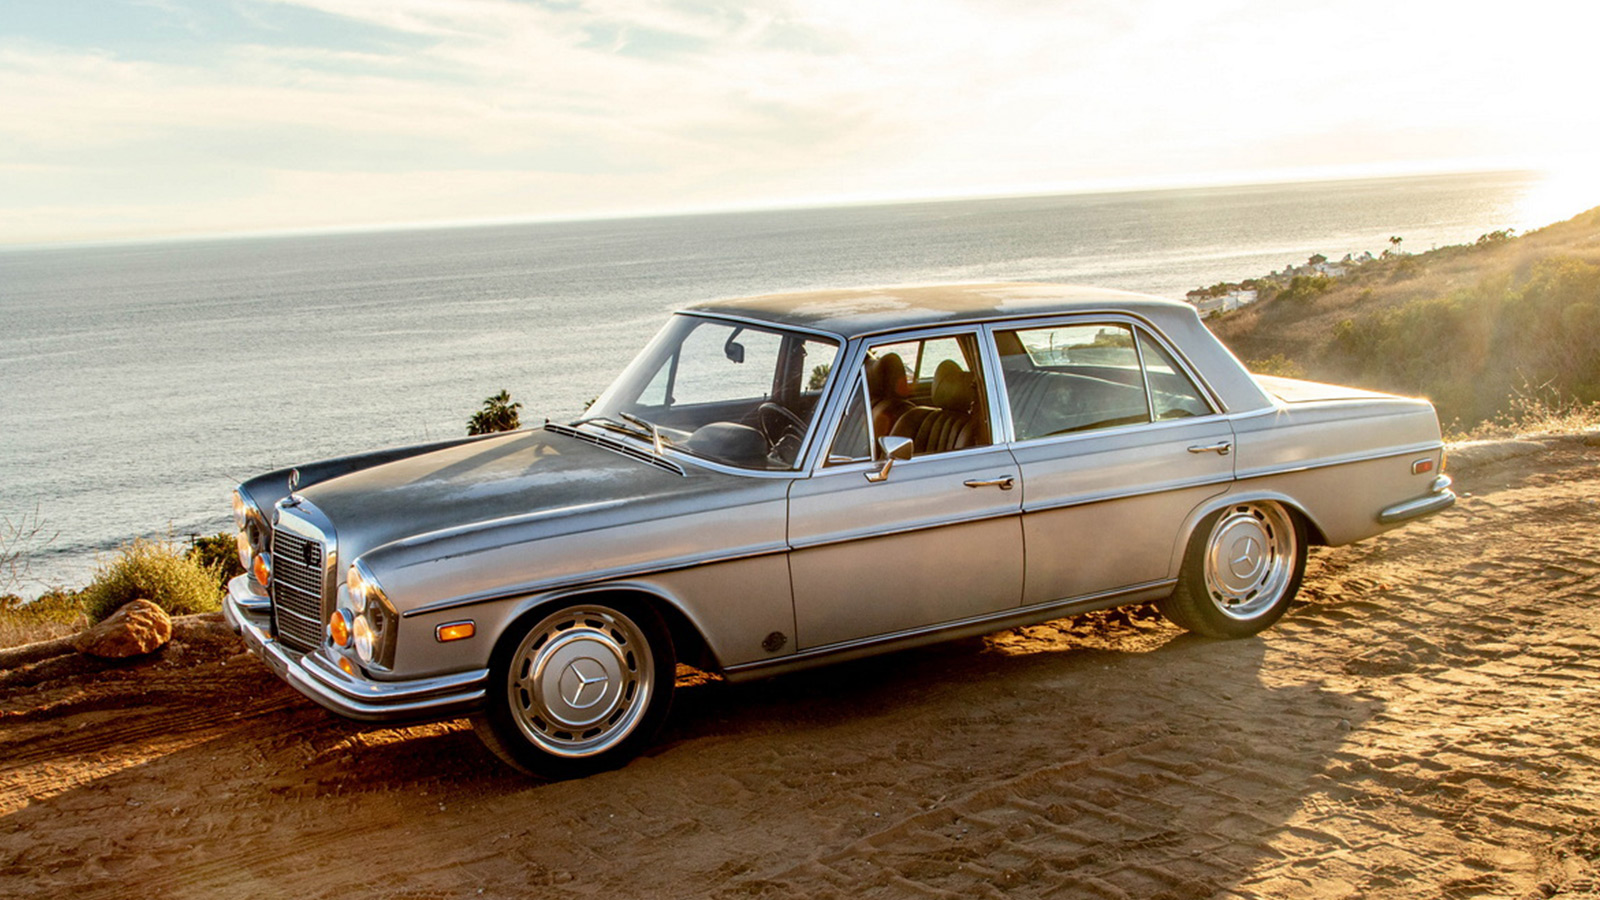 Mercedes 300 SEL “Derelict” by ICON